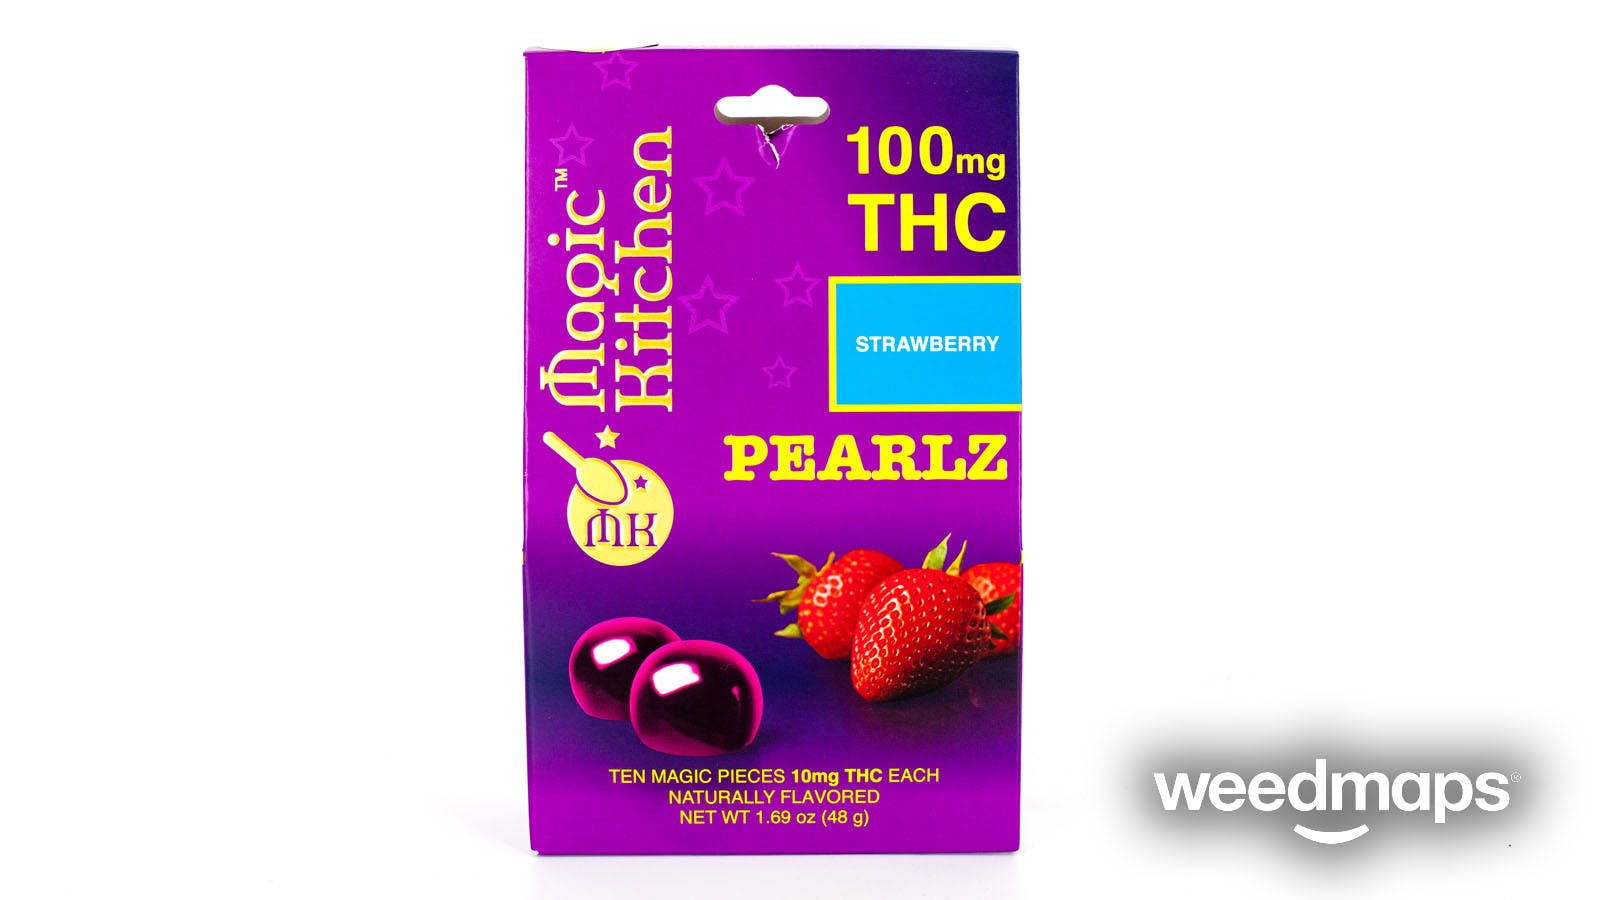 edible-kn-pearlz-strawberry-nwcs